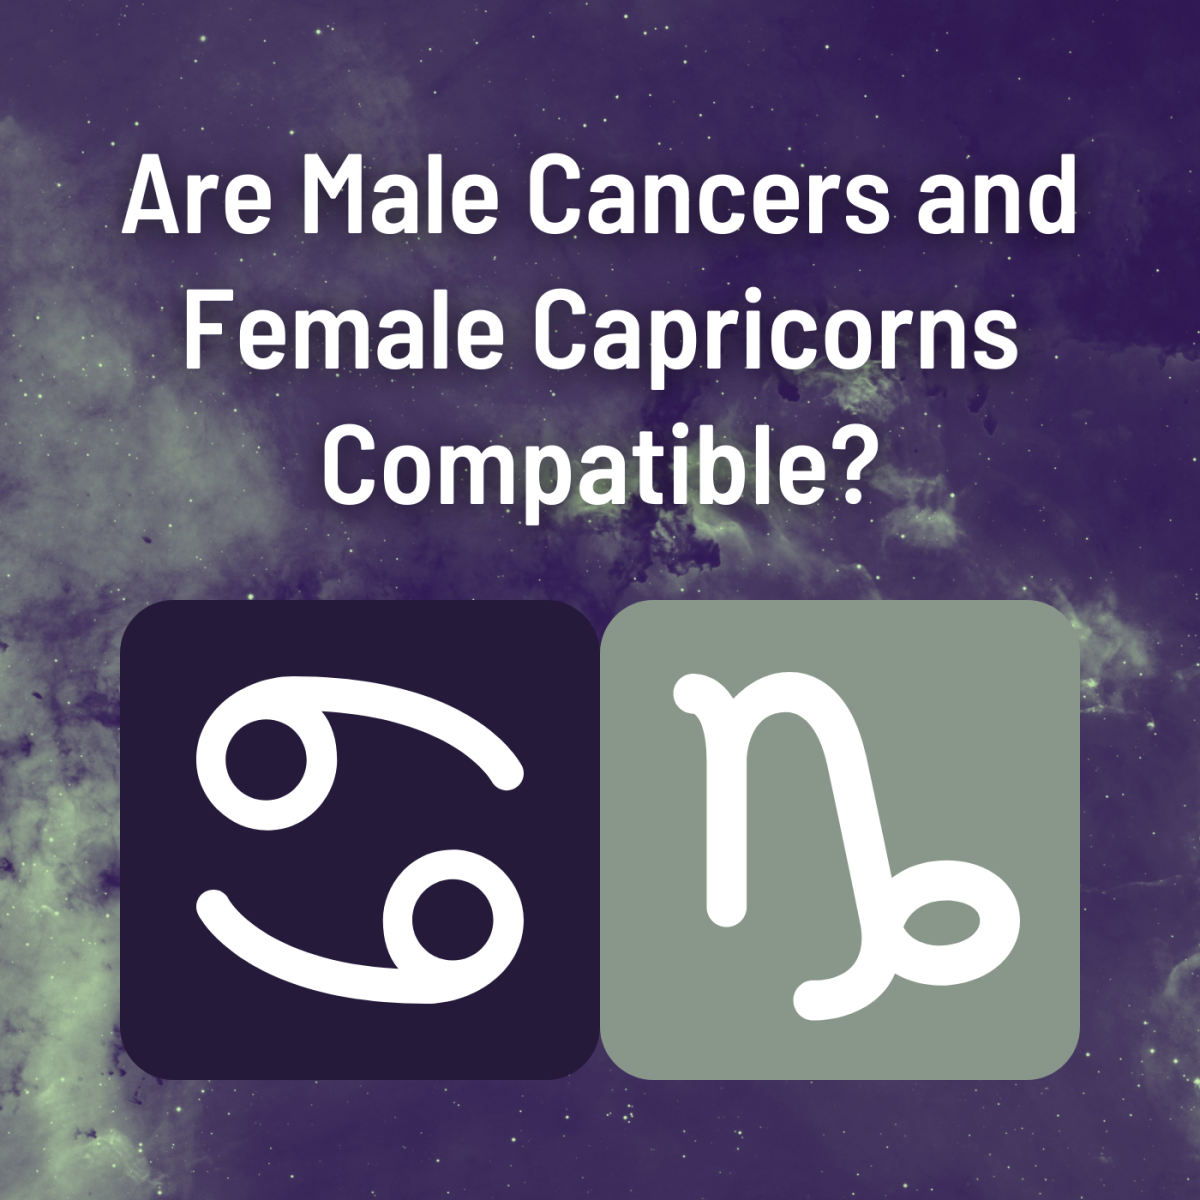 Explore the compatibility between women with the Capricorn zodiac sign and men with the Cancer sign.